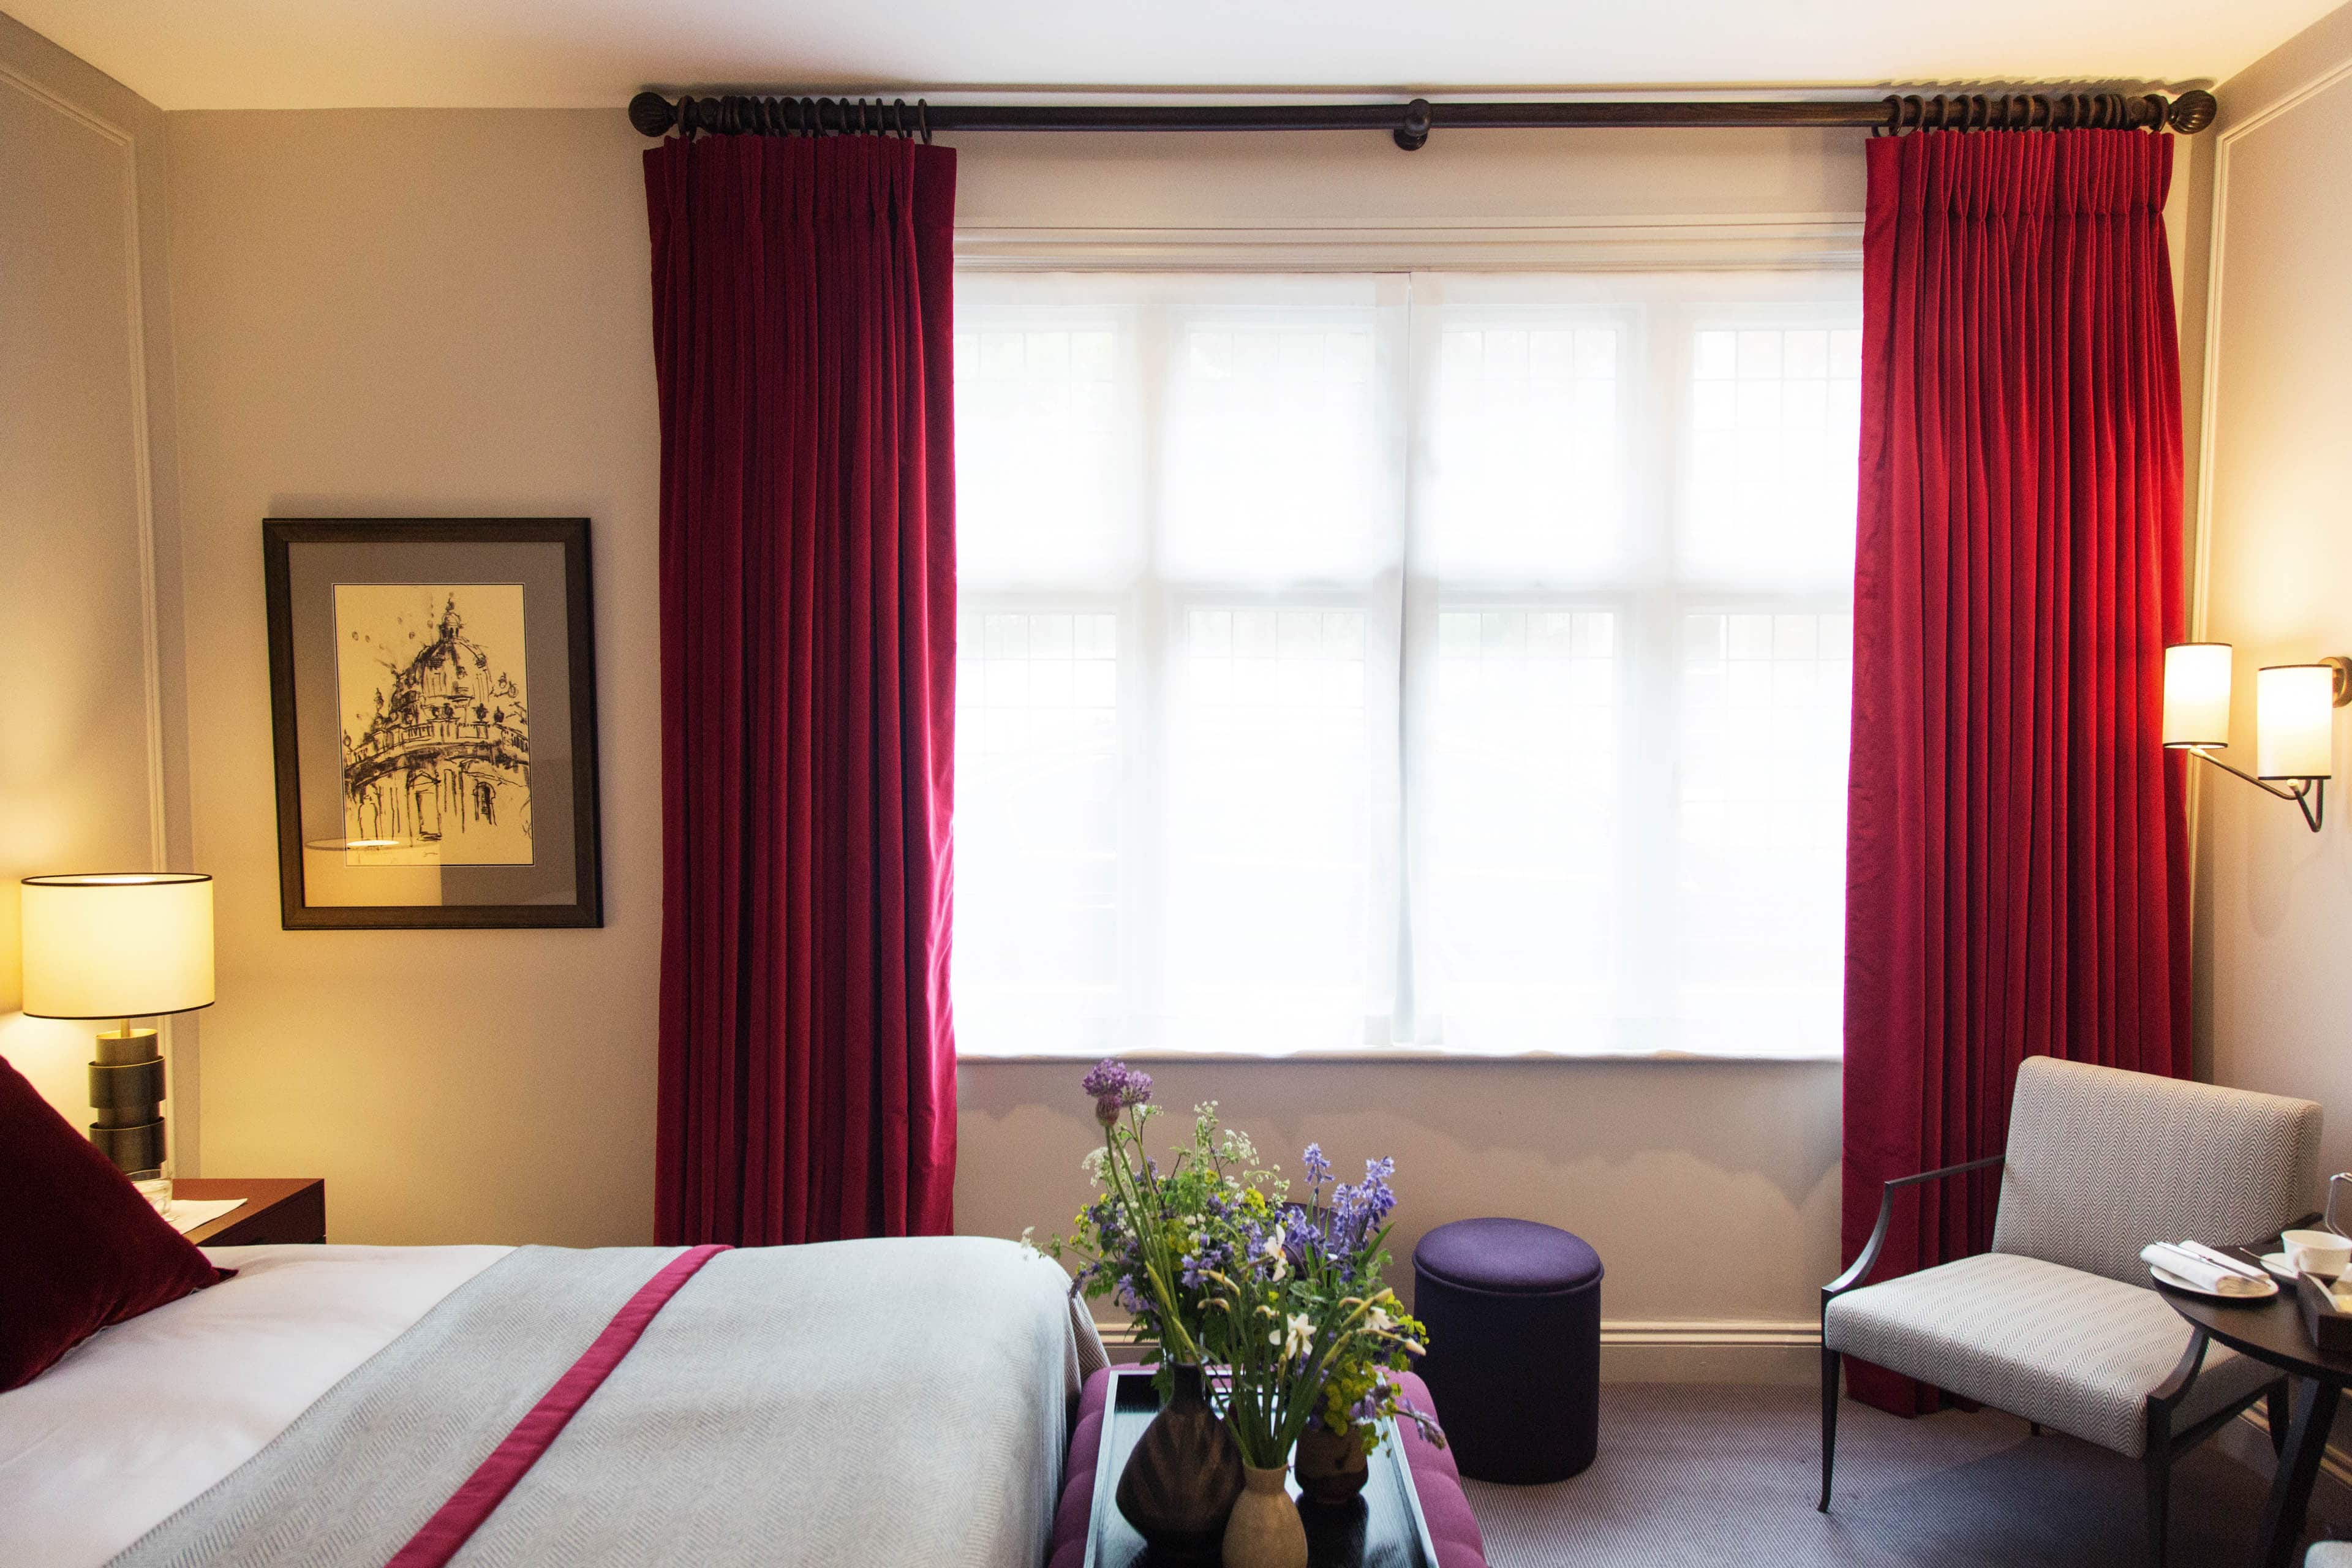 0009 - 2014 - Old Parsonage Hotel - Oxford - High Res - Bedroom Spring Flowers Red - Web Hero